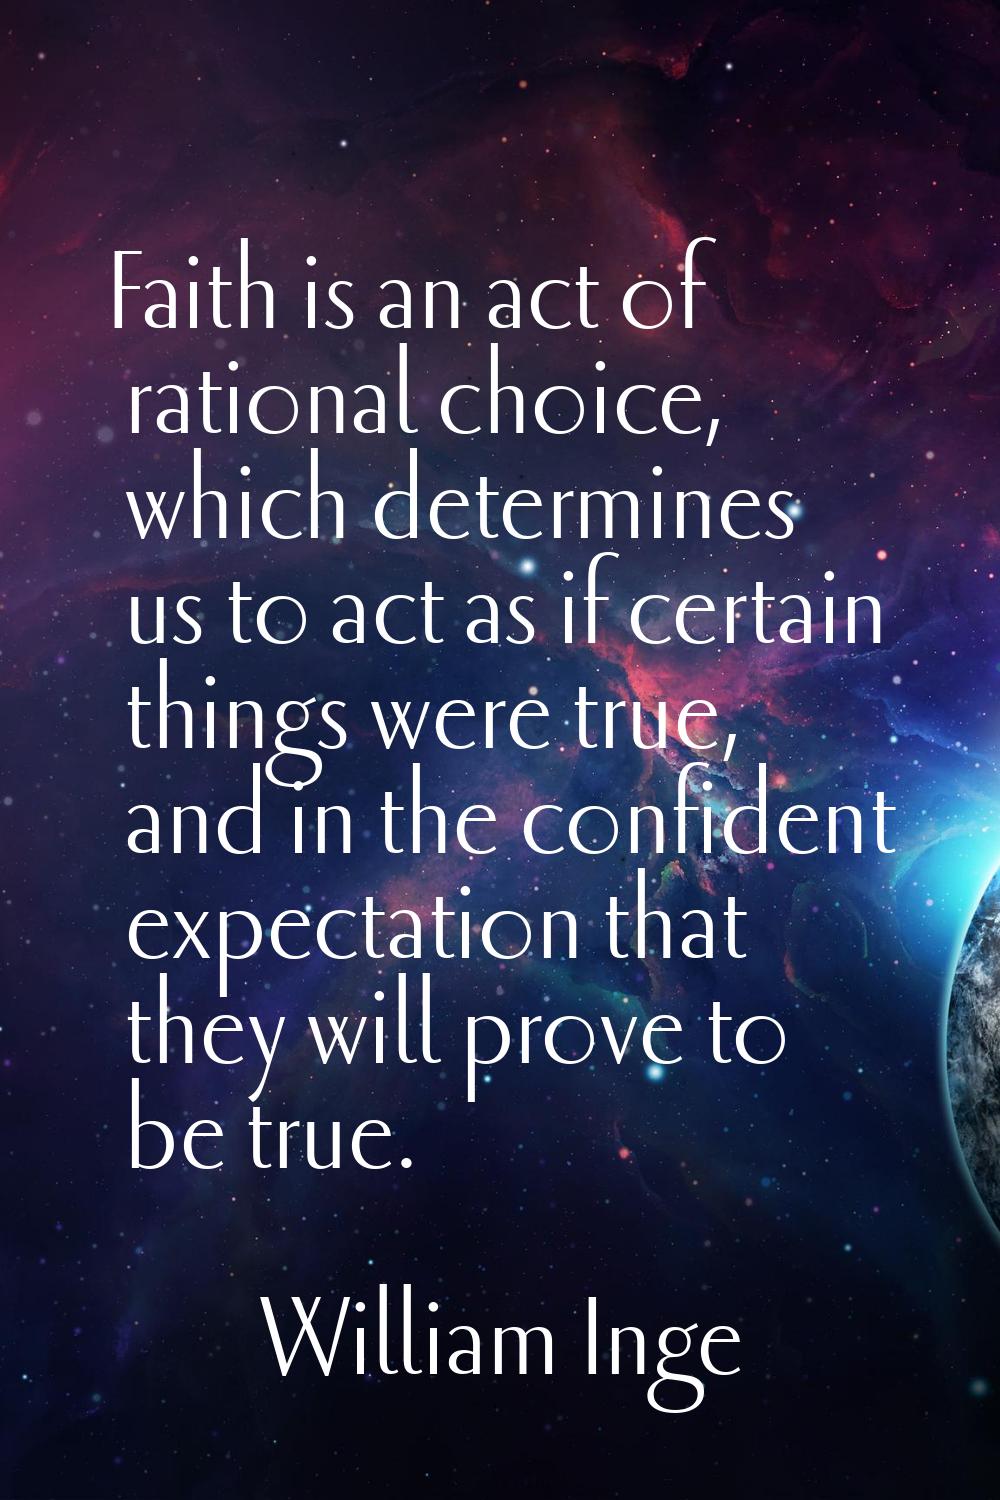 Faith is an act of rational choice, which determines us to act as if certain things were true, and 